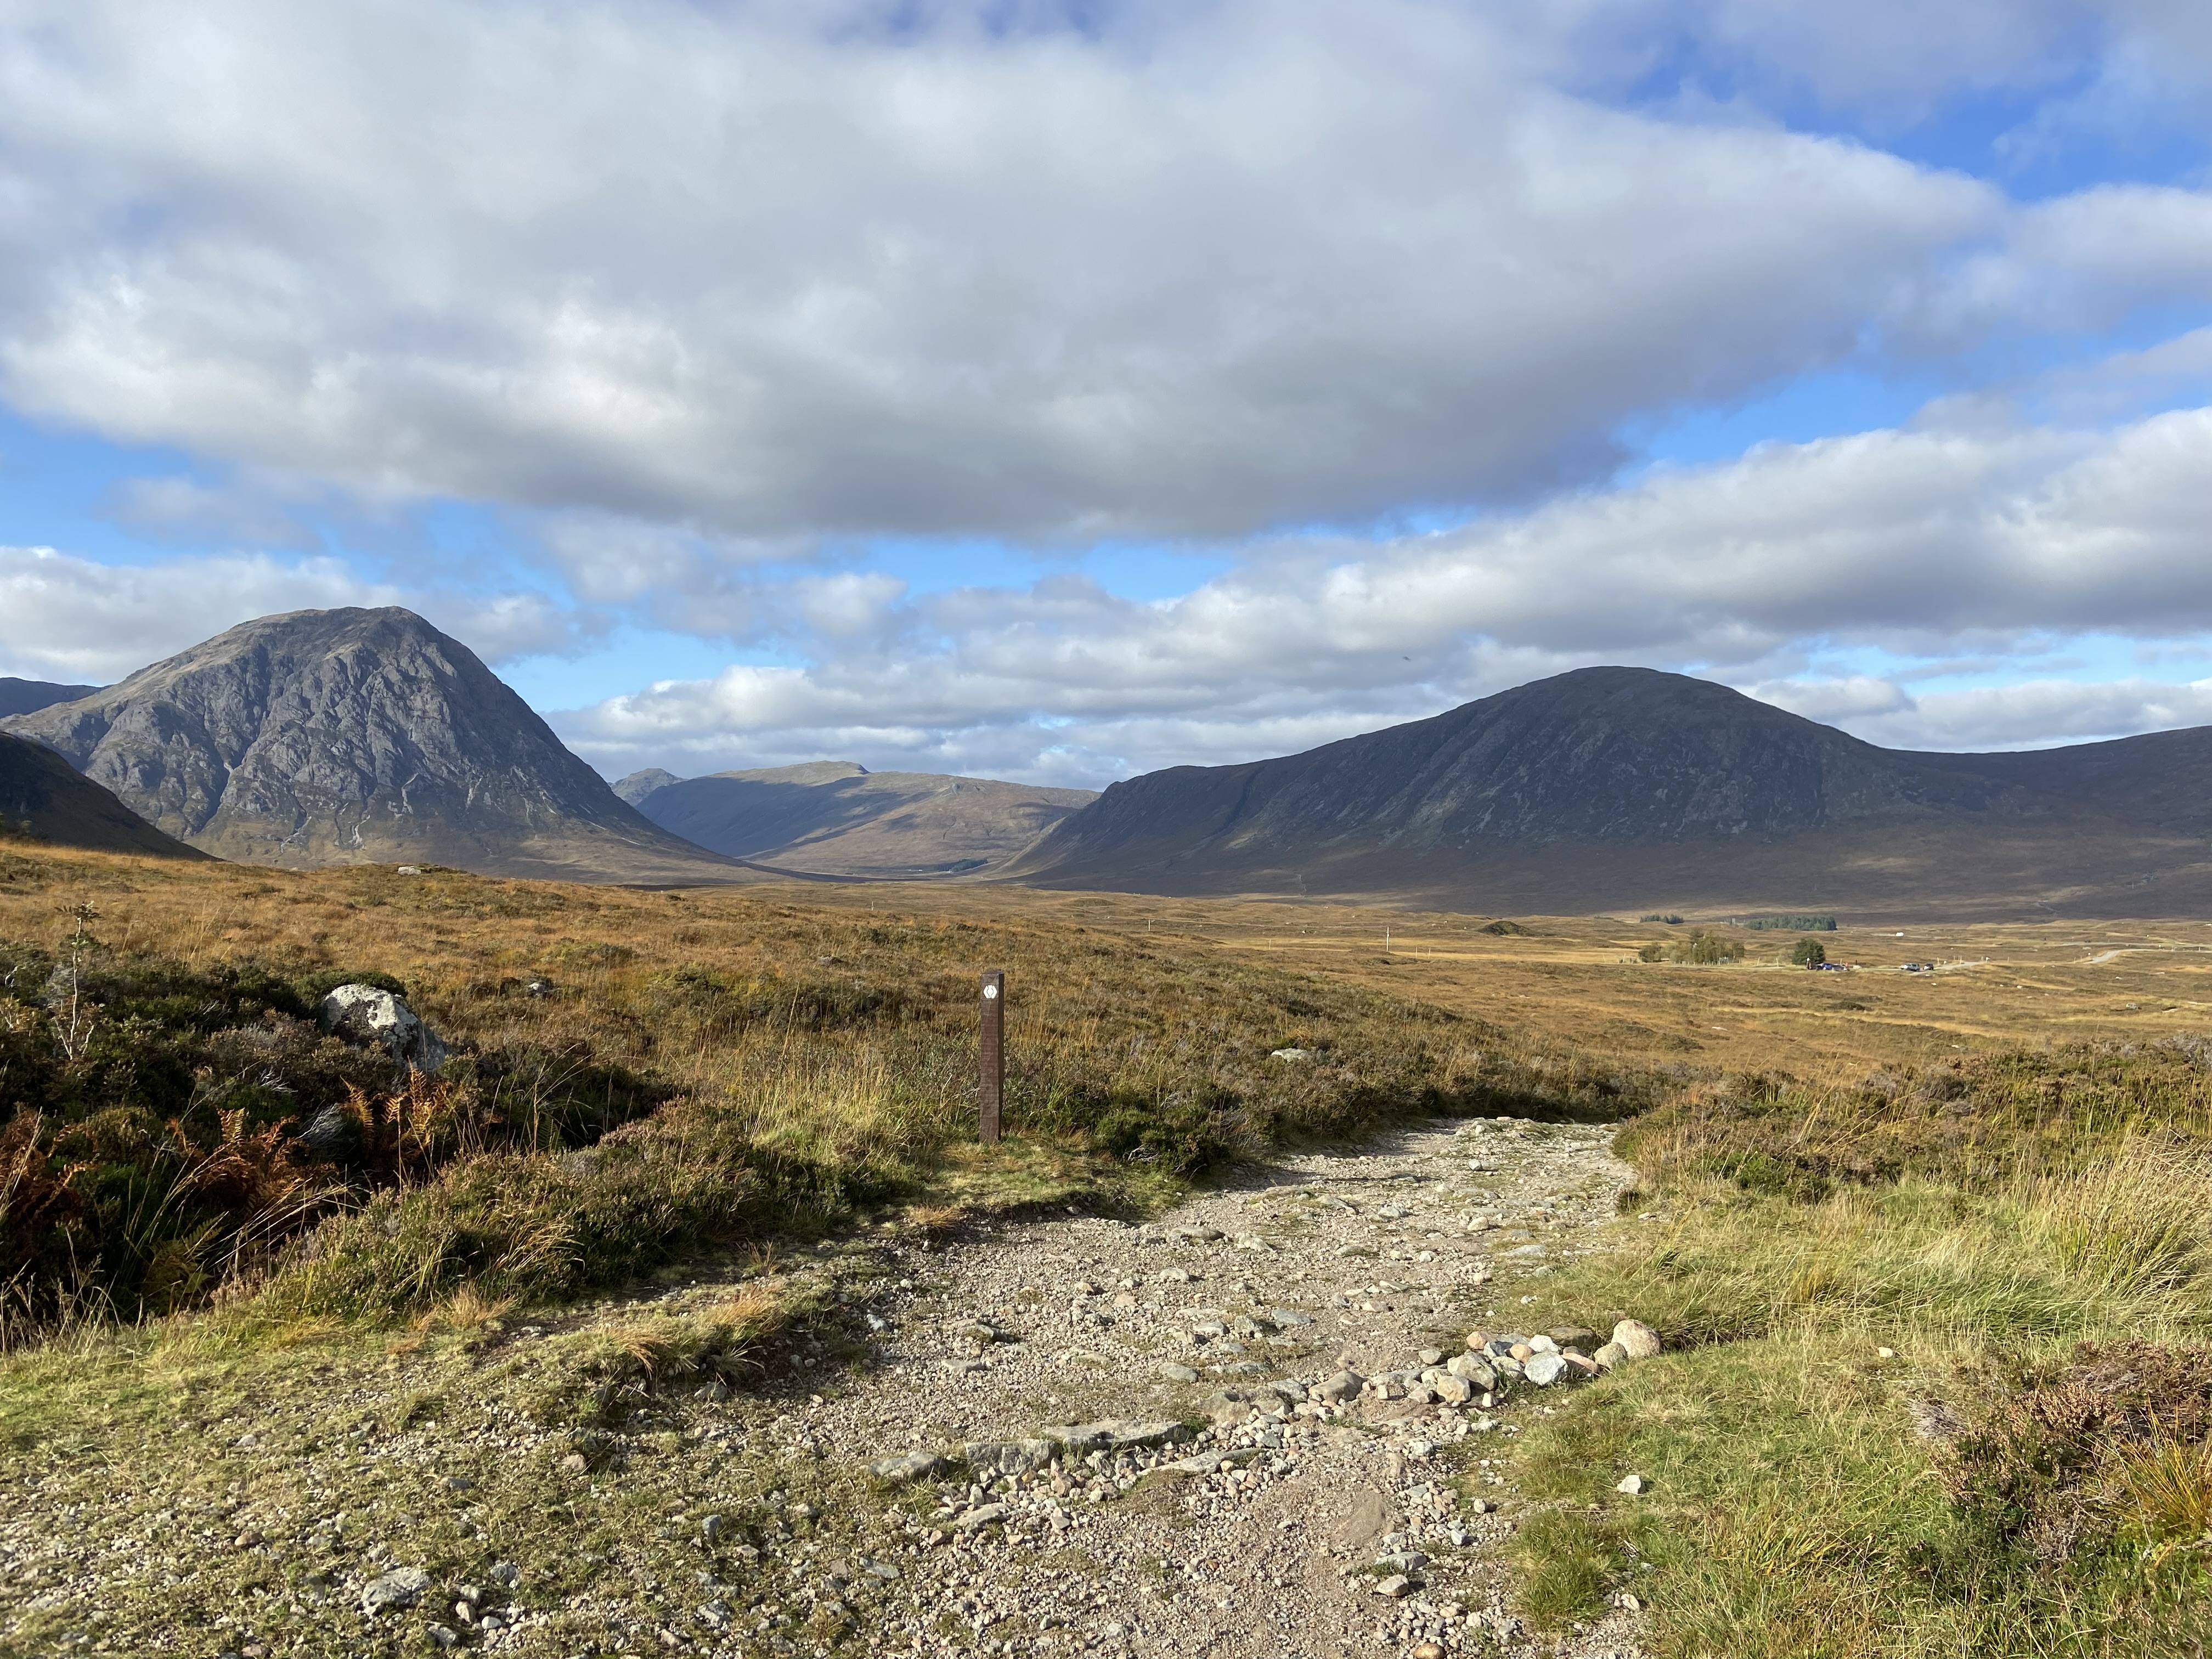 Site of interviews conducted in Glencoe, Scotland